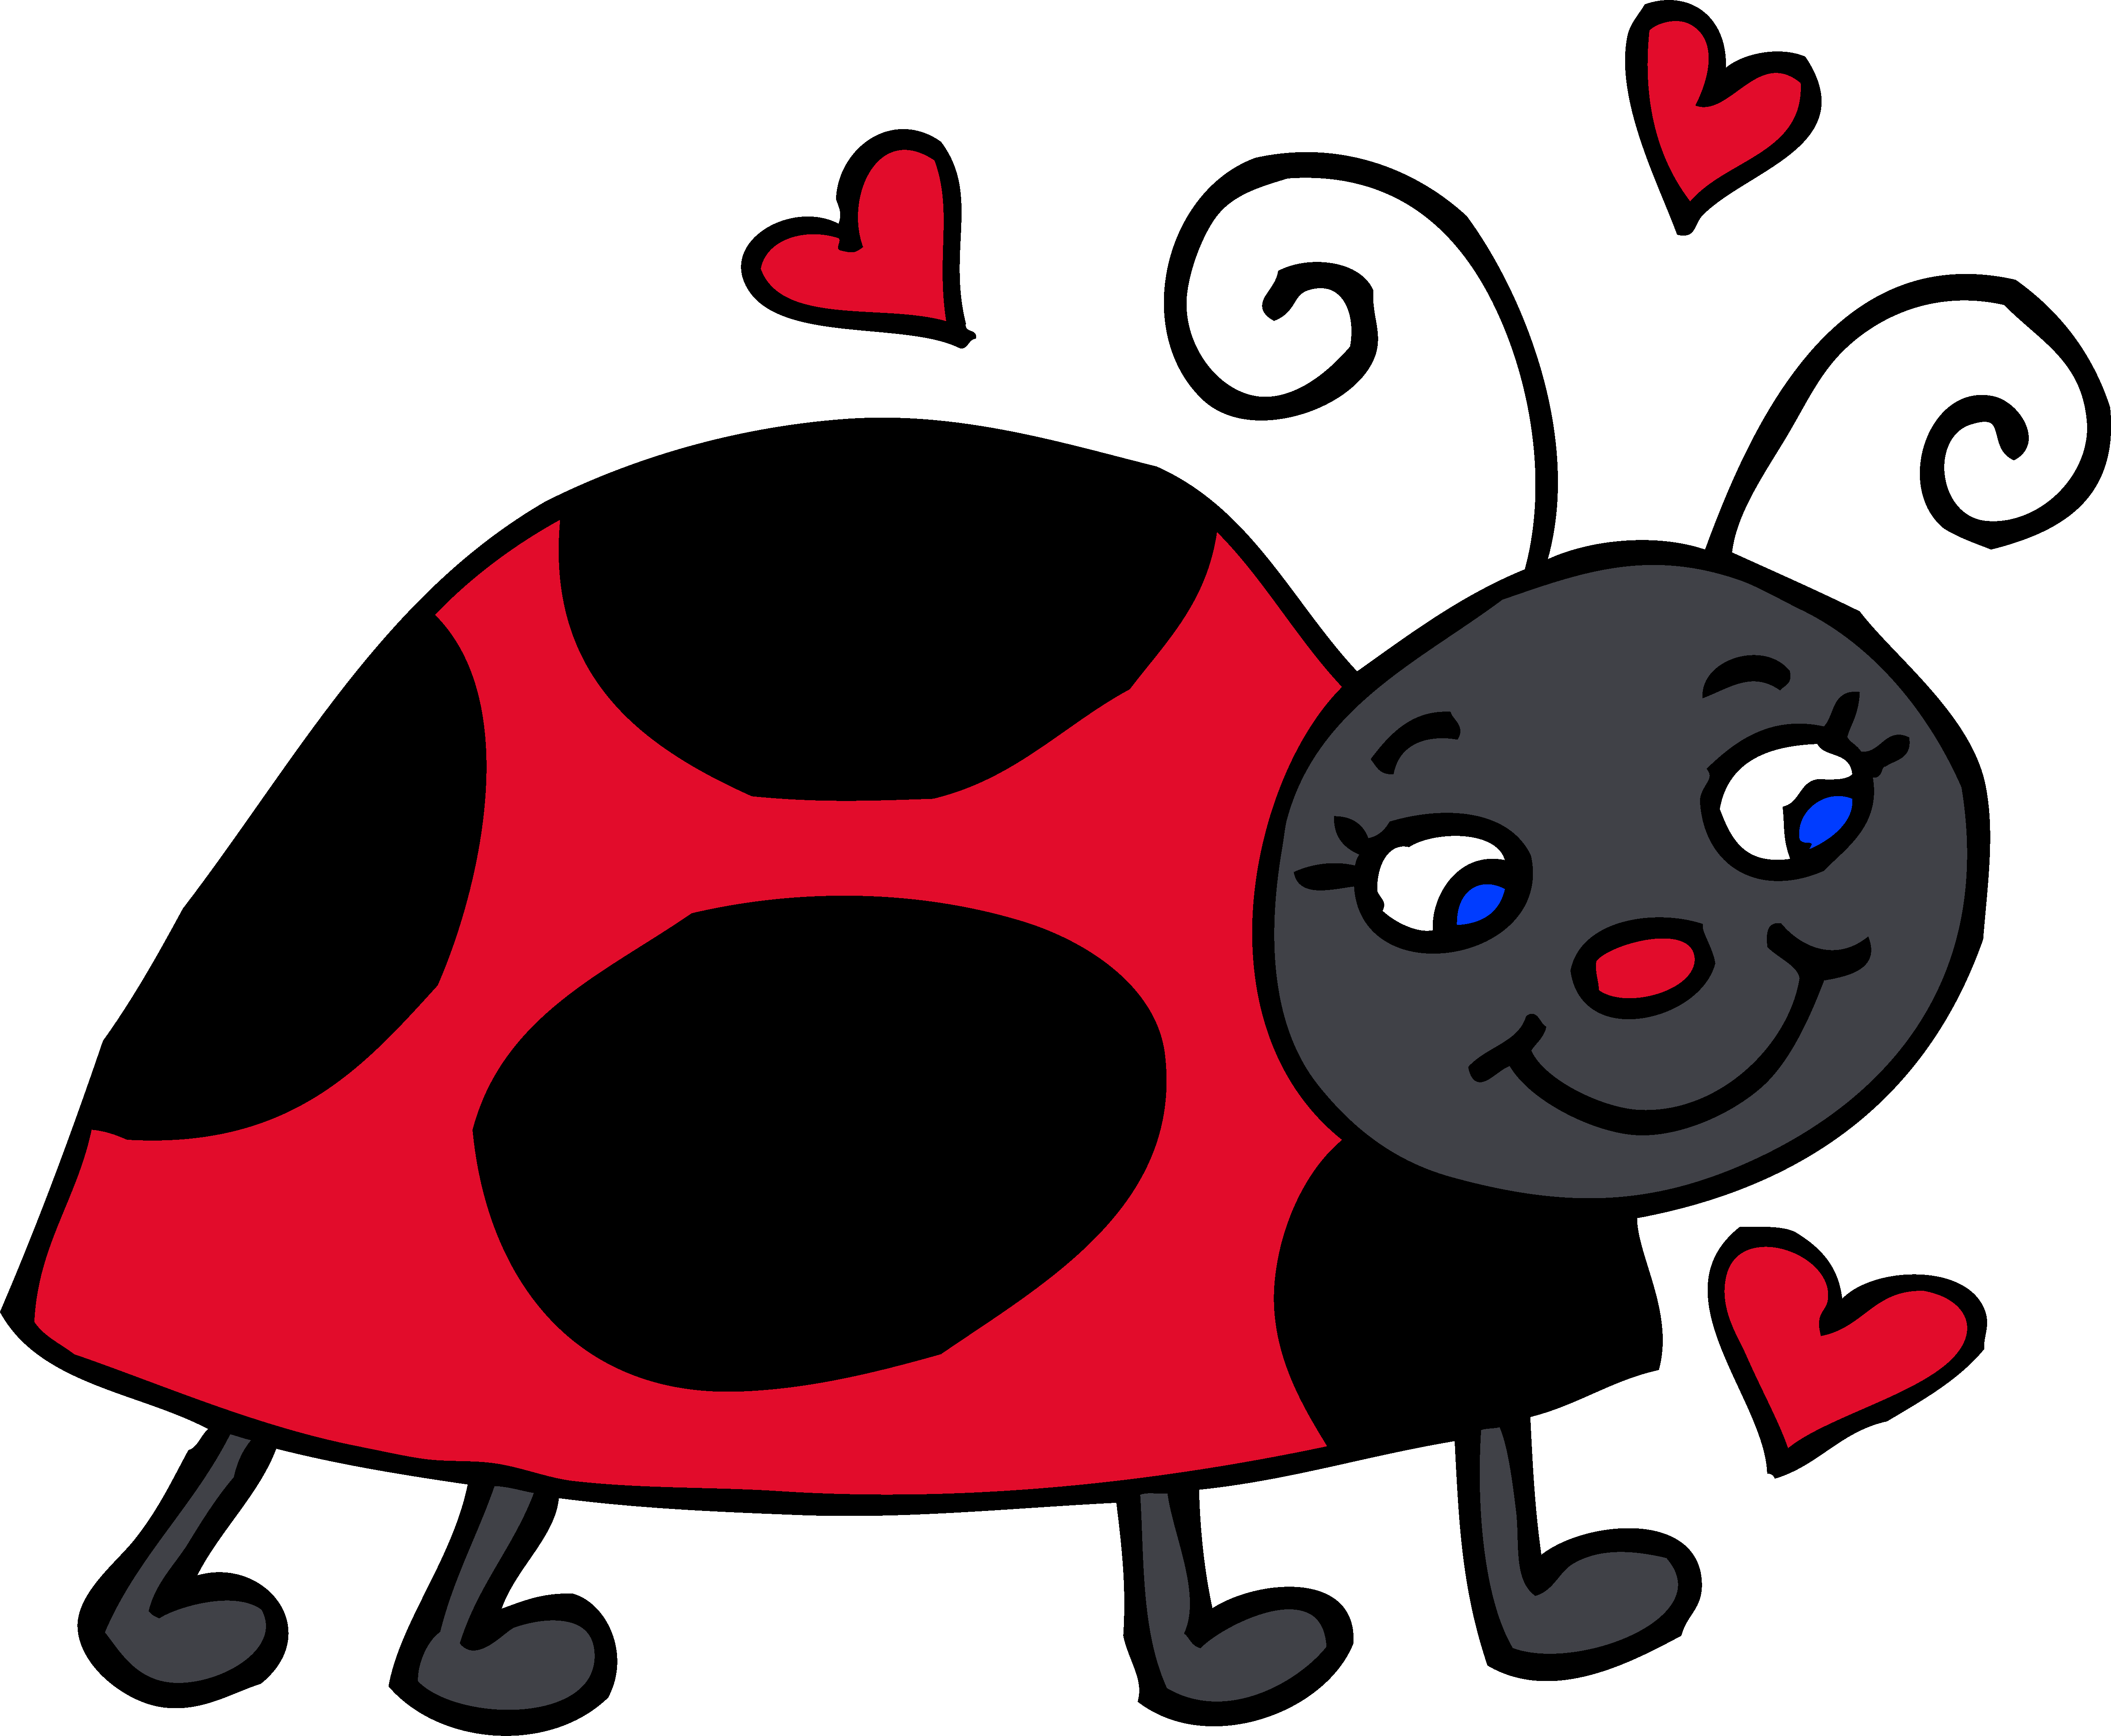 Ladybug clipart #1, Download drawings